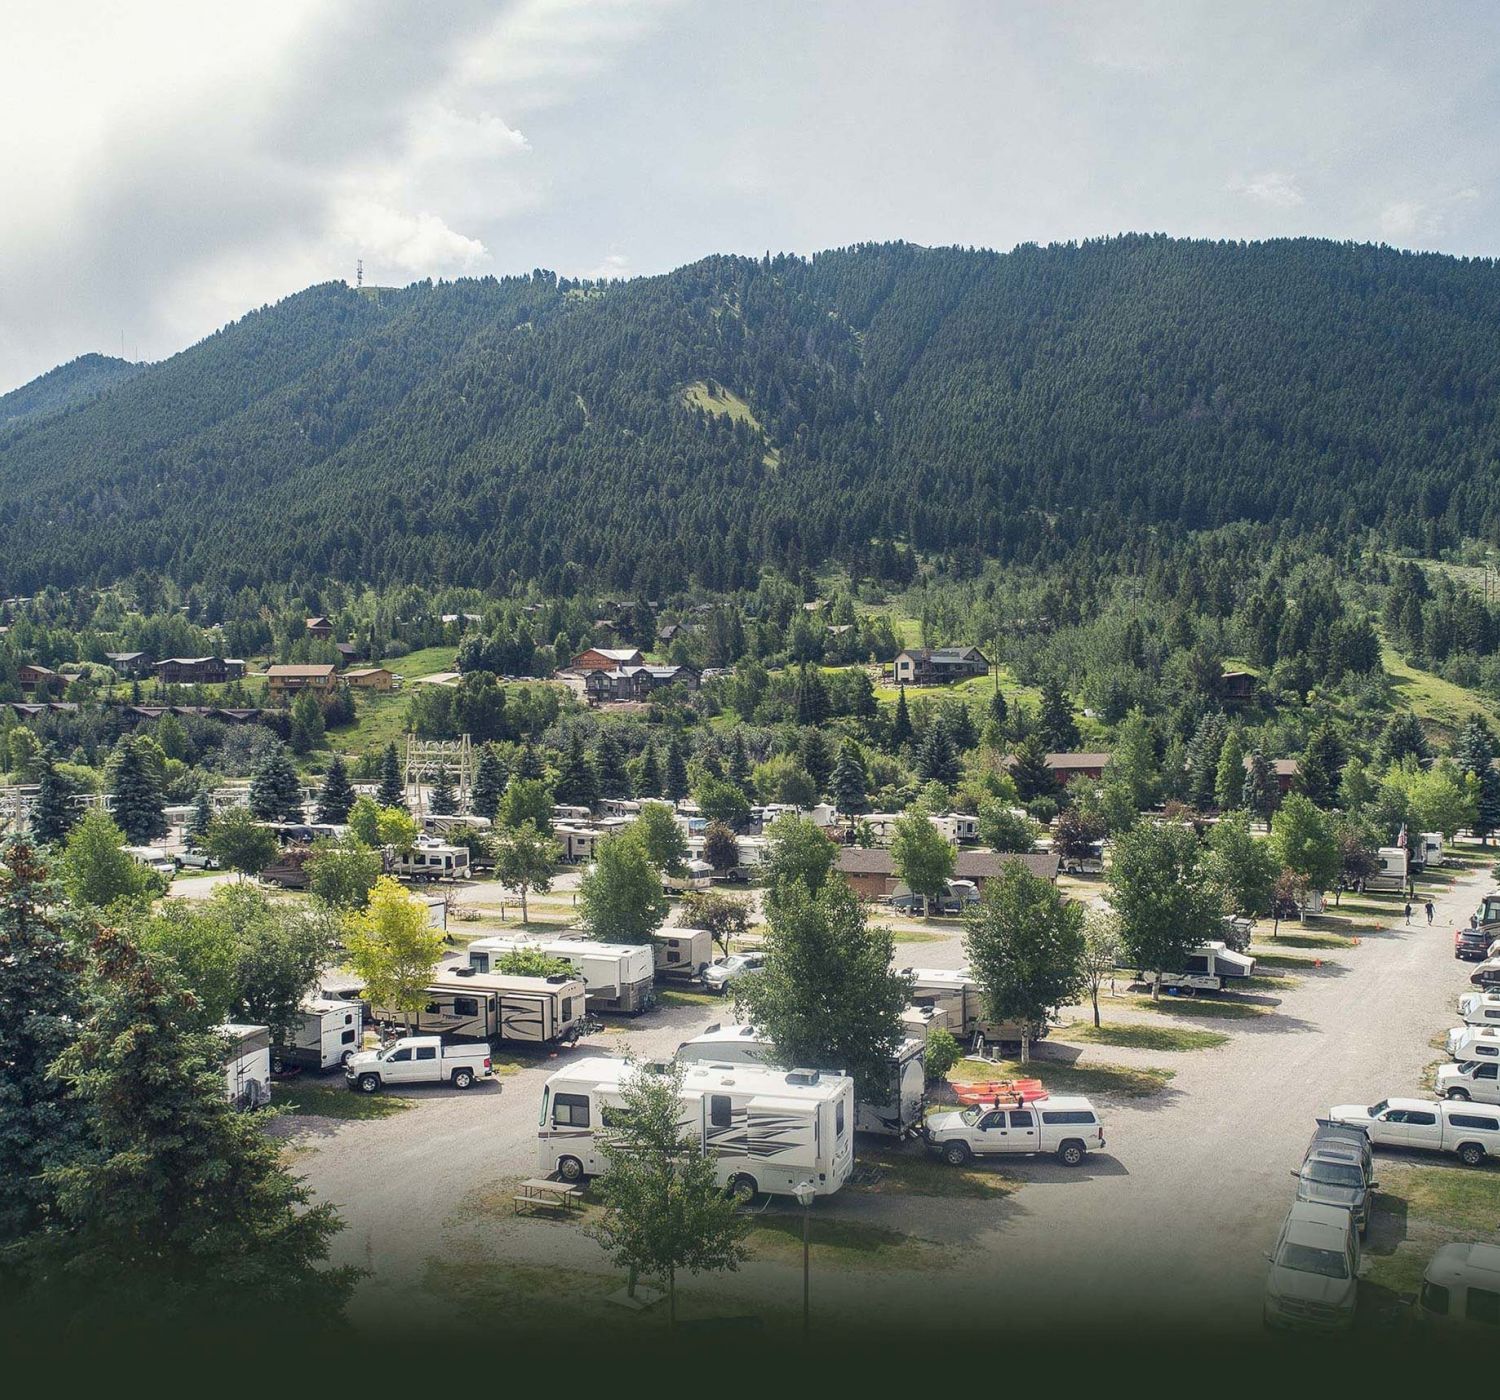 The image depicts a campground with numerous RVs parked among trees, set against a backdrop of forested hills and mountains under a cloudy sky.